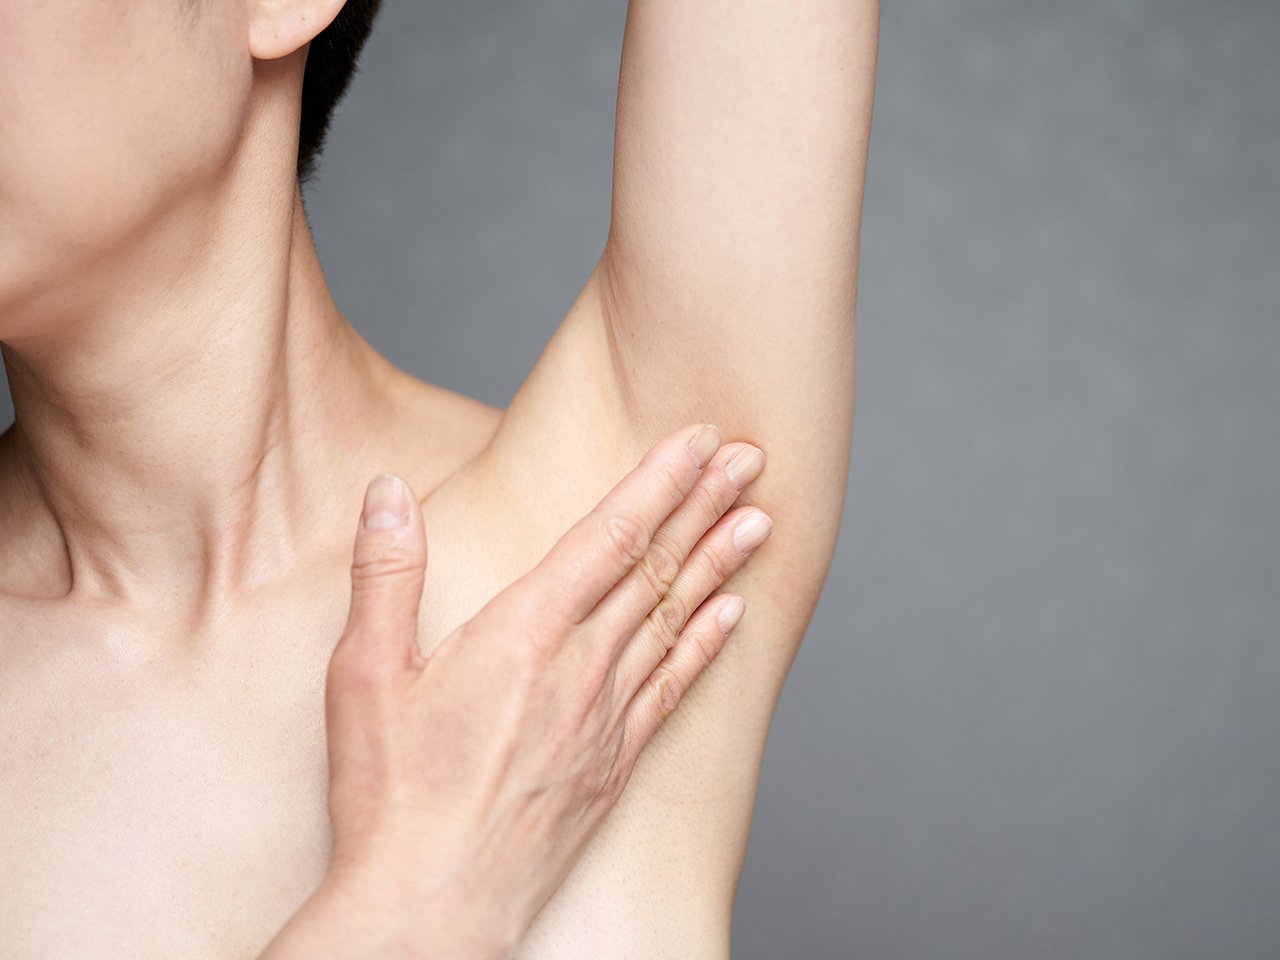 Woman lifting her arm and touching her armpit